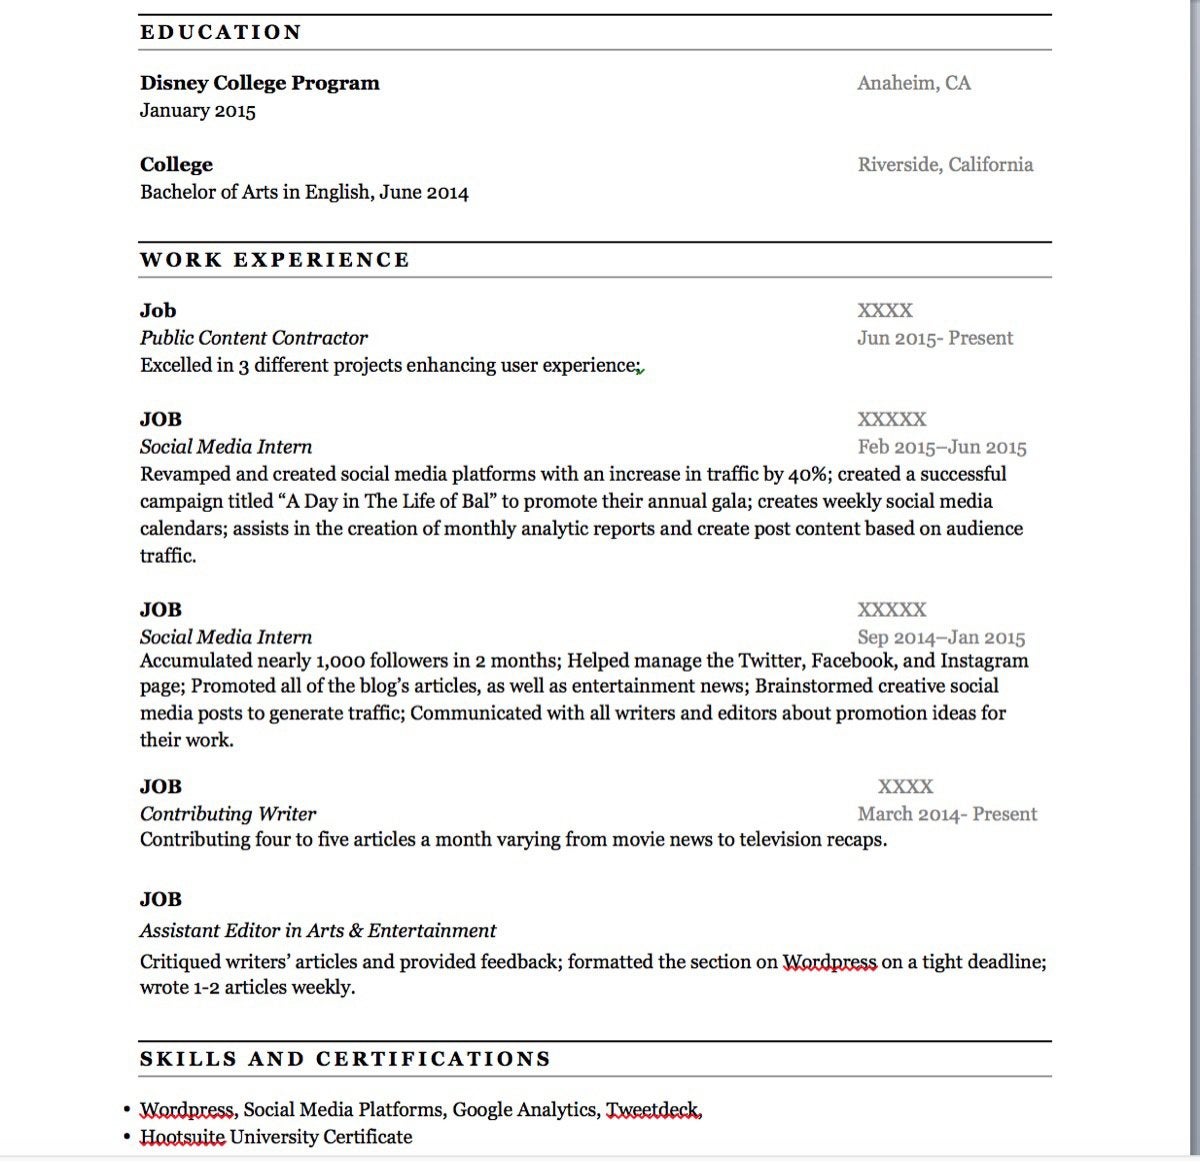 Want to get a job as an editorial assistant. Help me with my resume ...